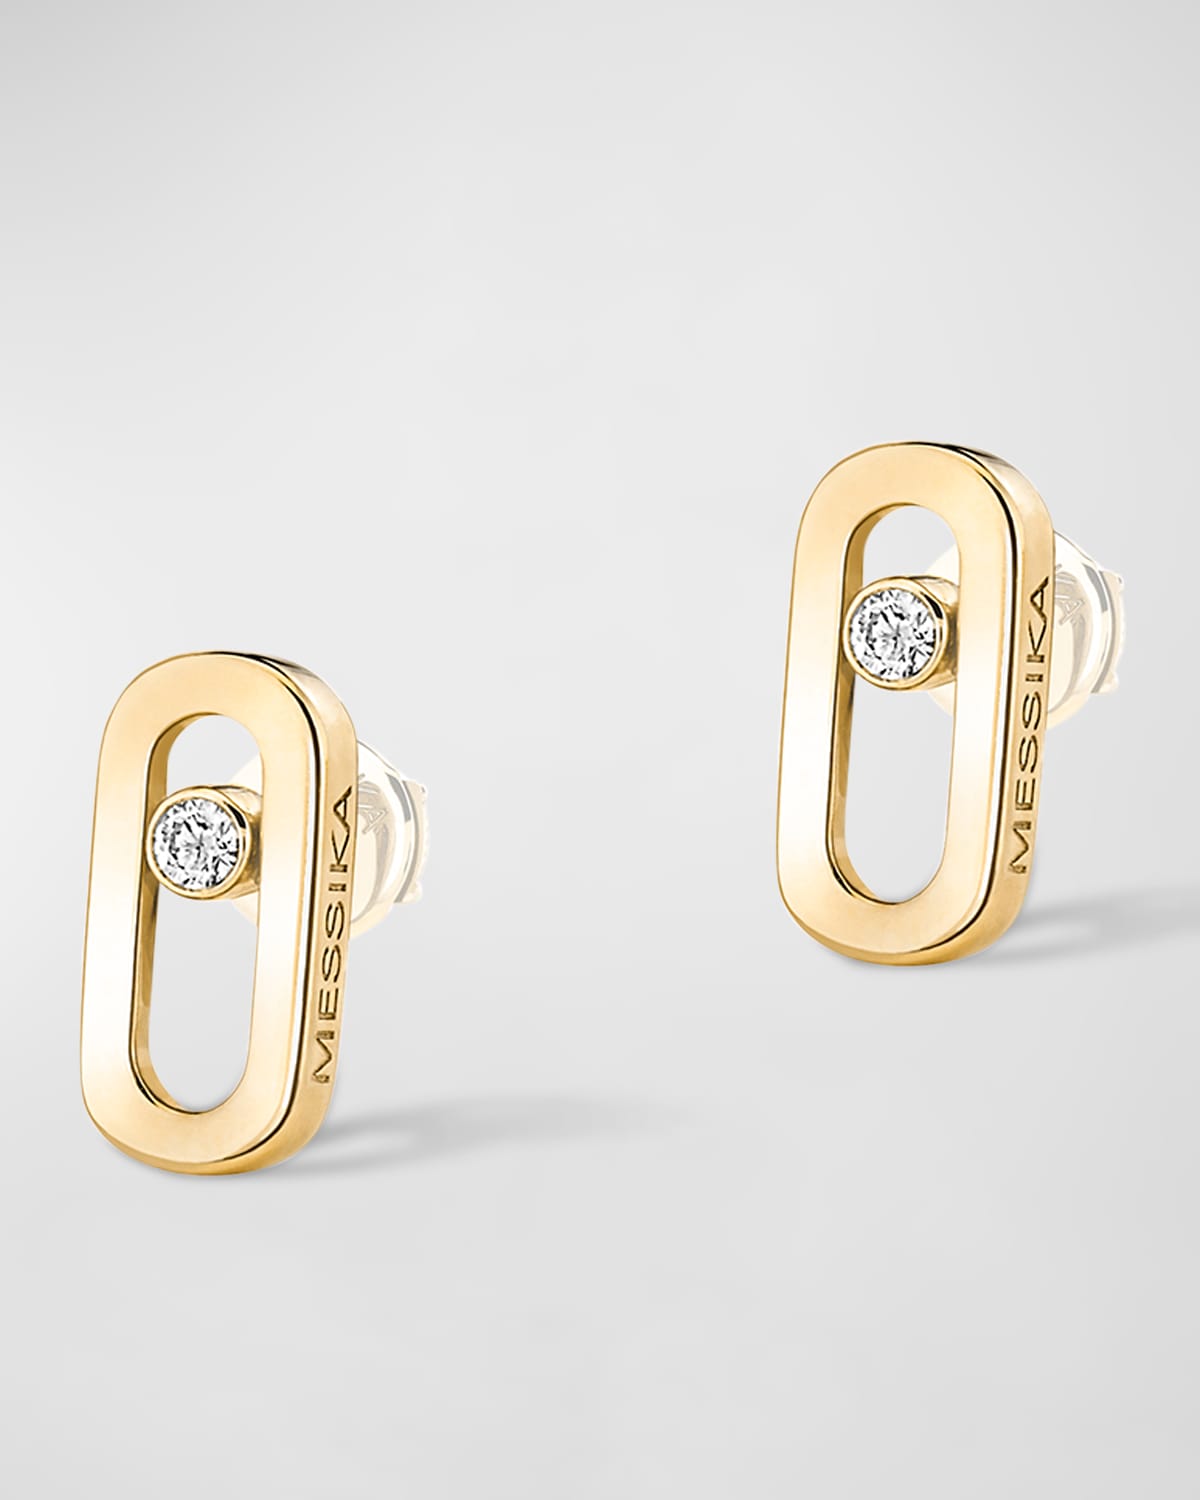 MESSIKA MOVE UNO 18K YELLOW GOLD STUD EARRINGS